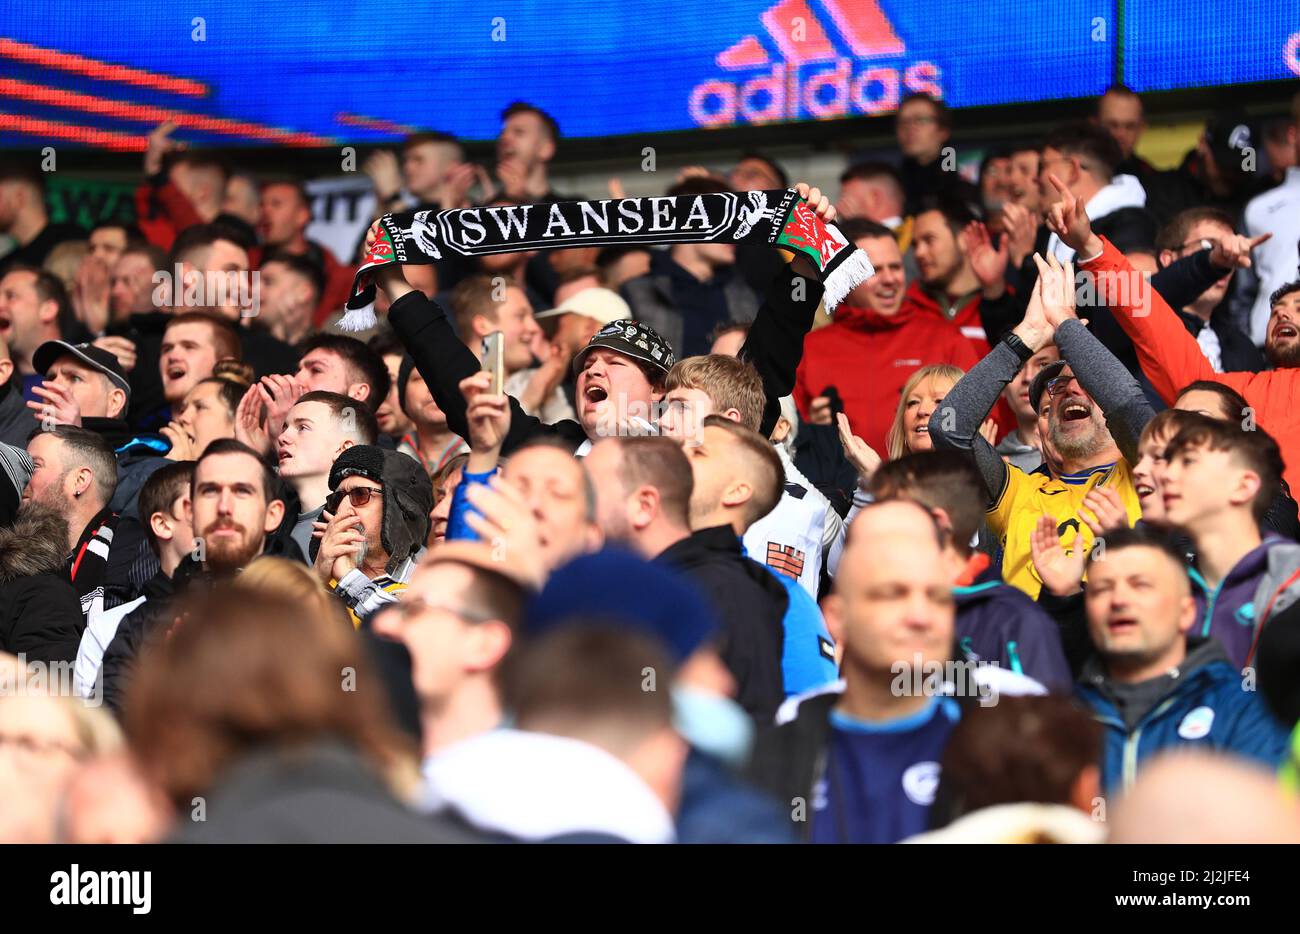 Cardiff 1-0 Swansea: Fans In The Stands (PICTURES)